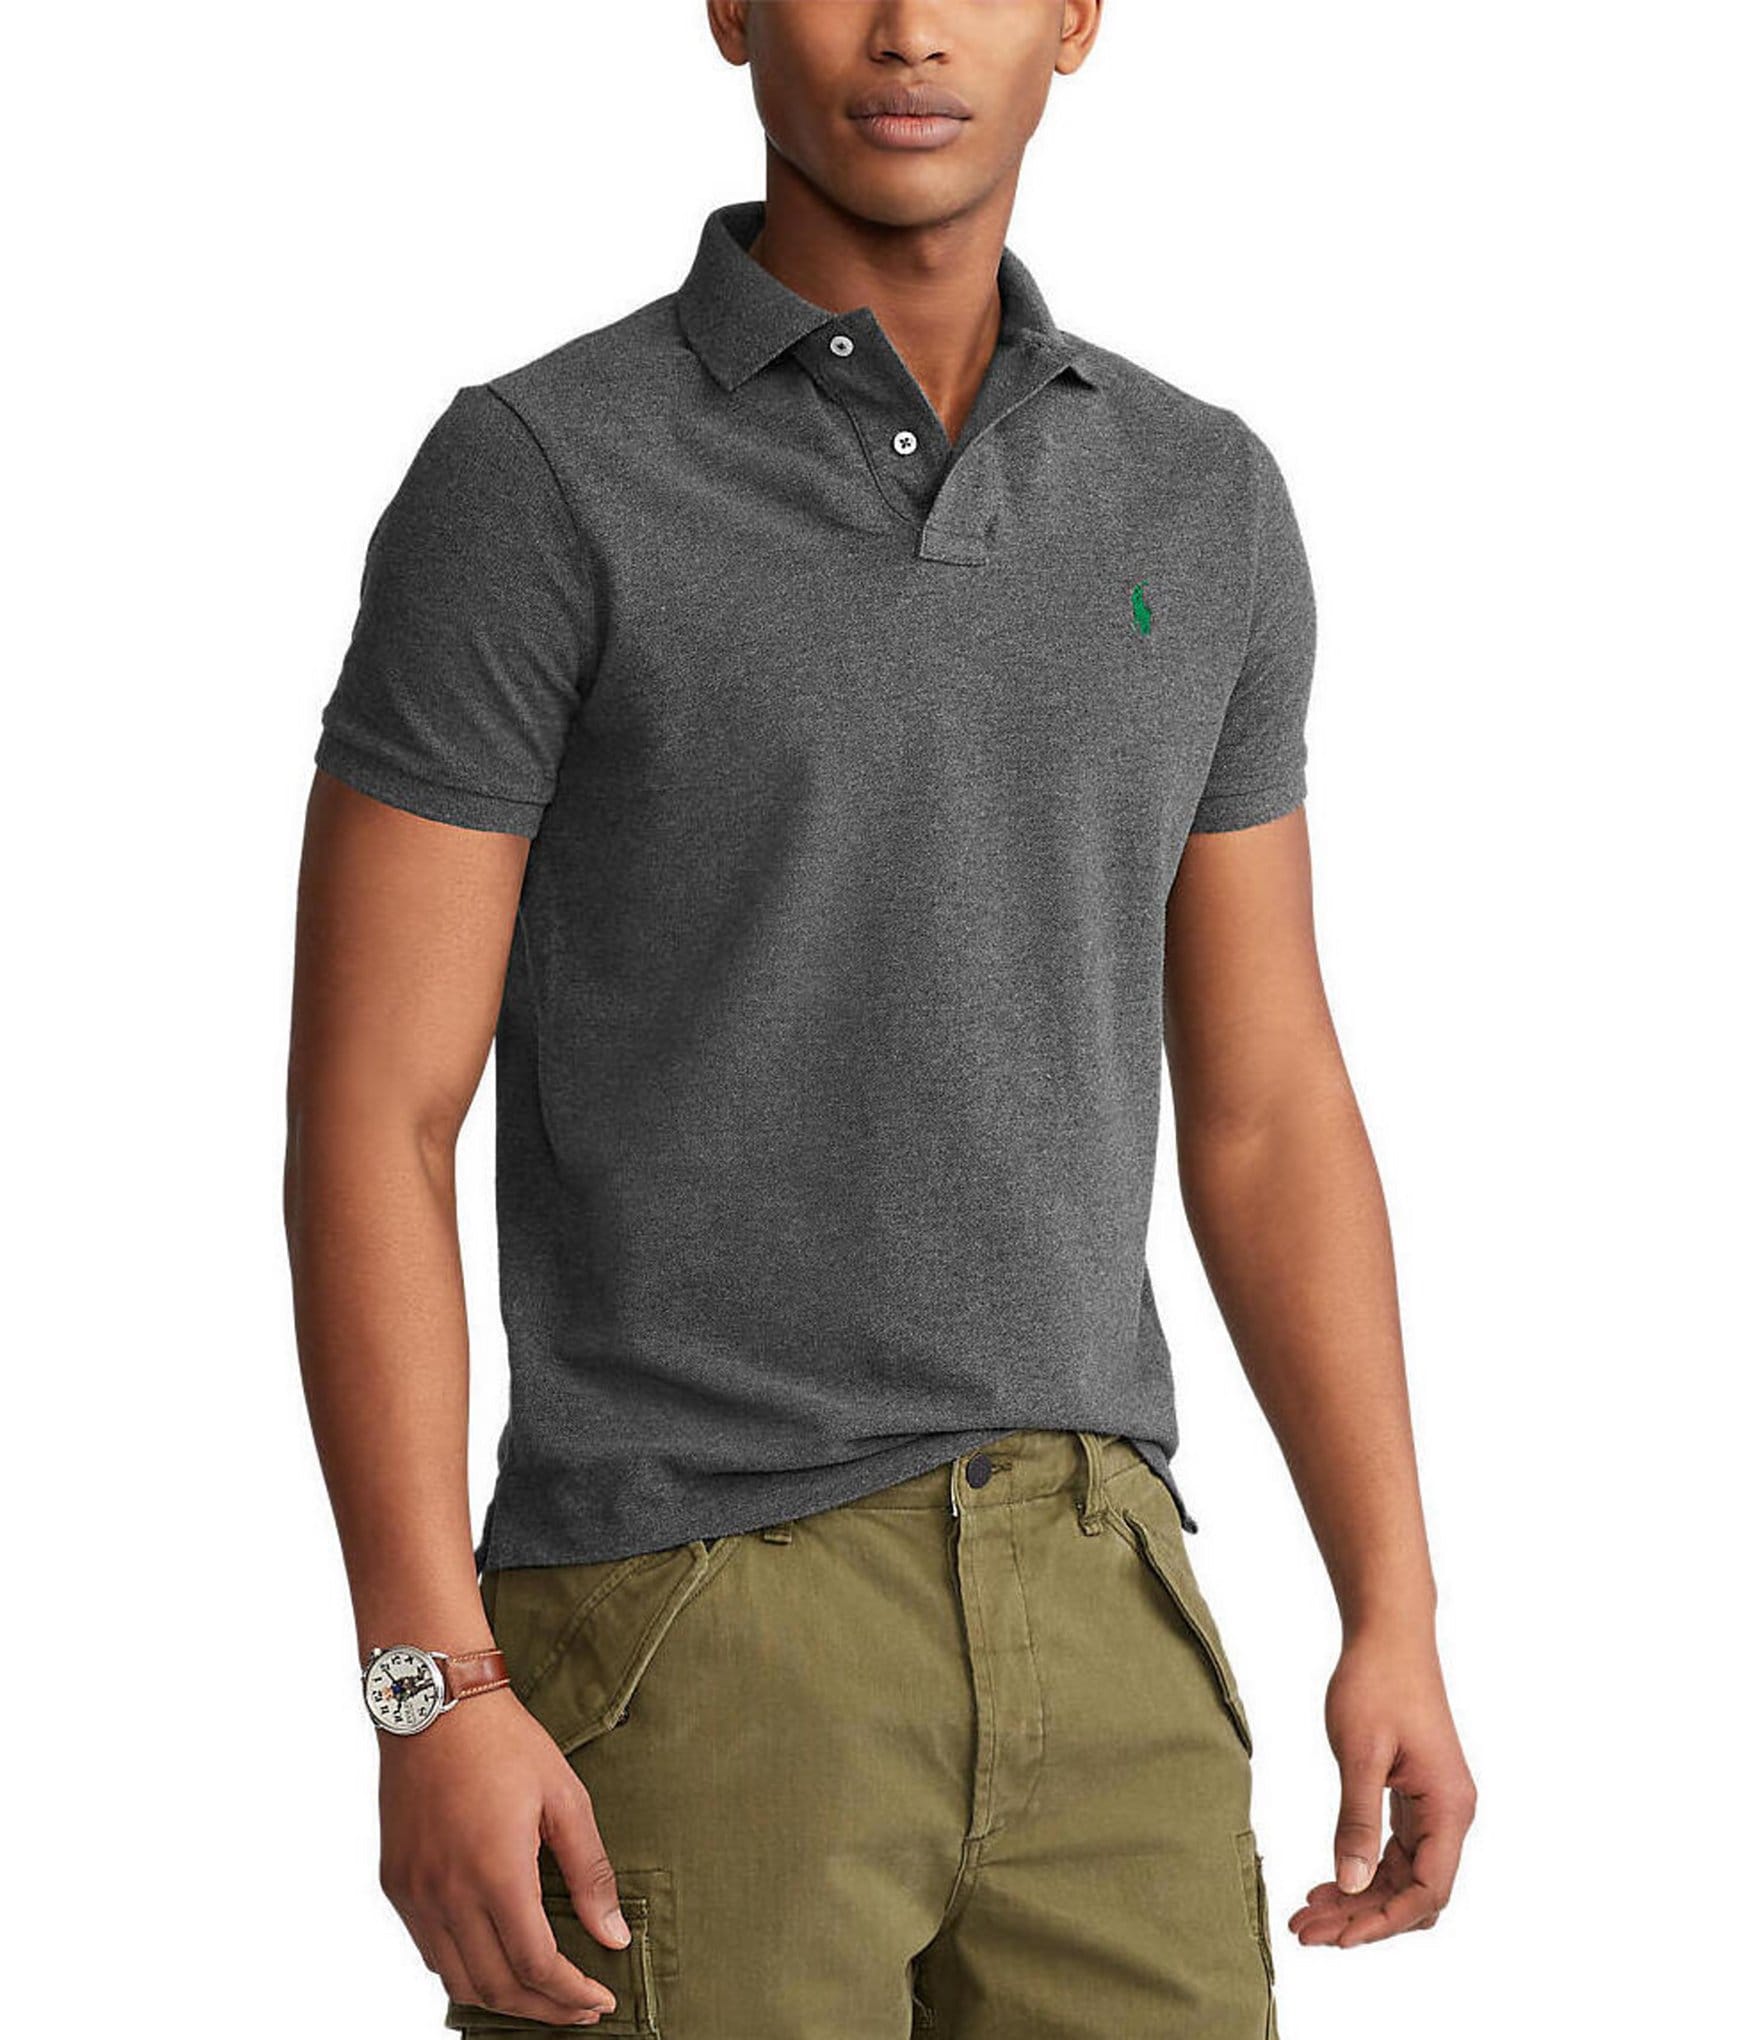 10 Of The Best Men's Luxury Polo Shirts